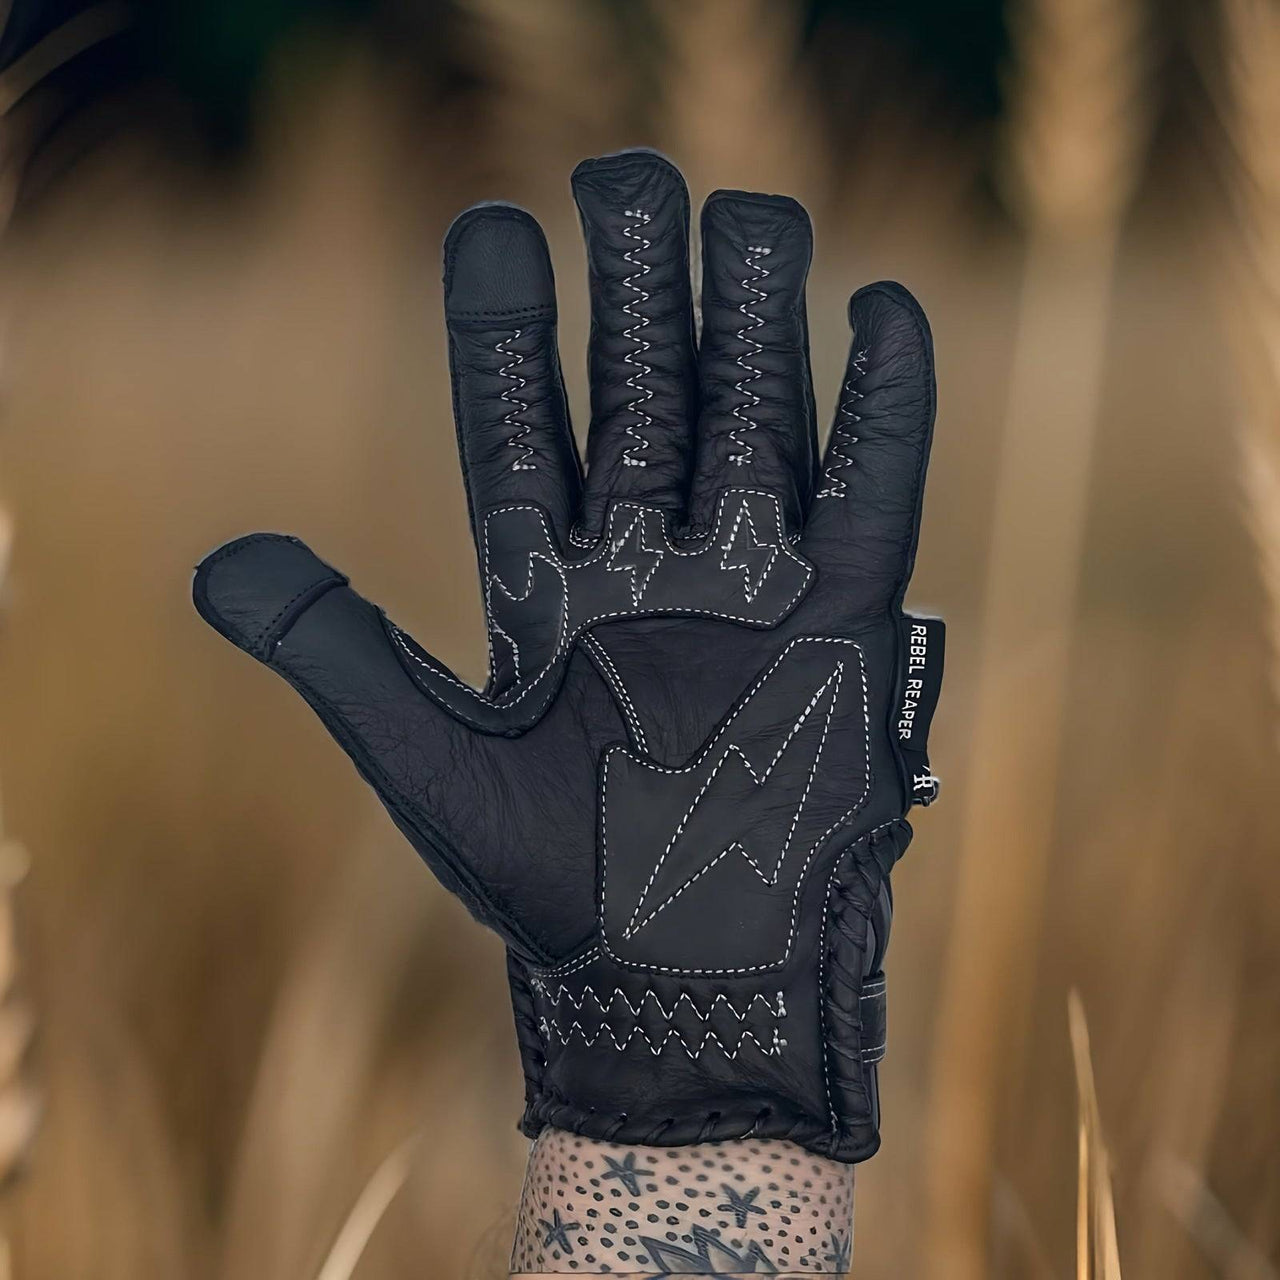 Leather Motorcycle Riding Gloves - Modern Roper - Grey Stars